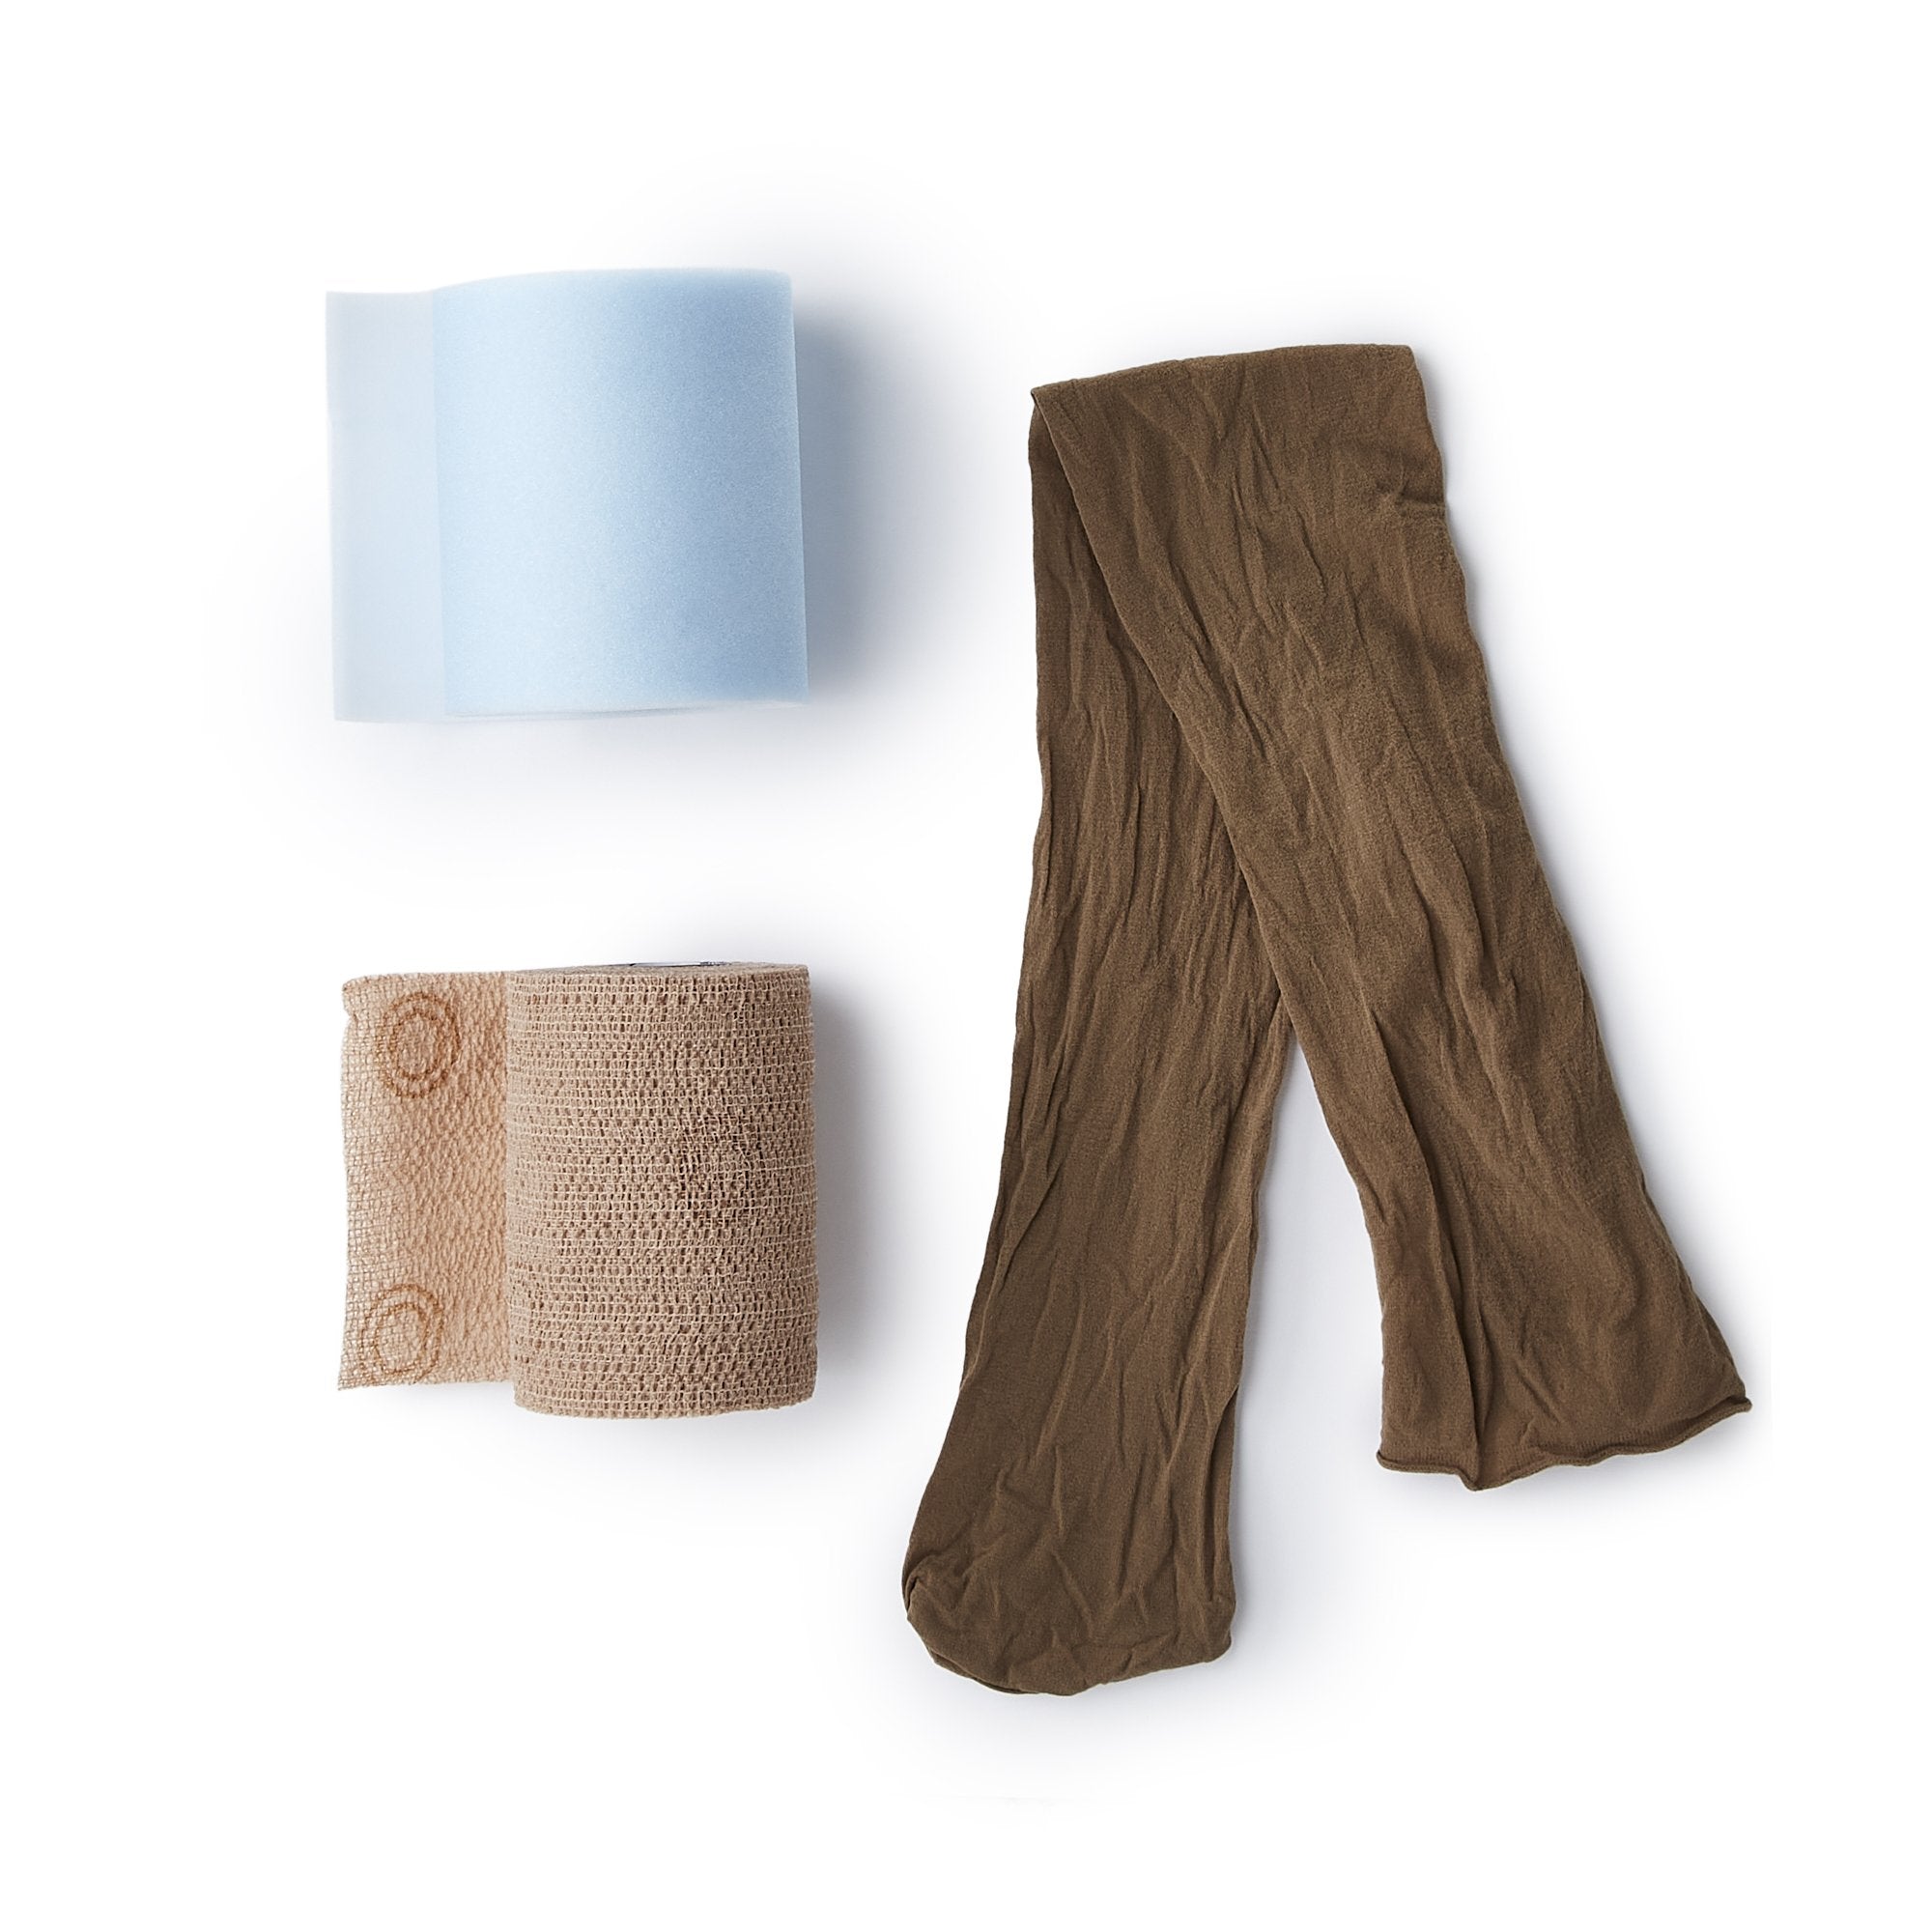 2 Layer Compression Bandage System CoFlex® TLC with Indicators 4 Inch X 3-2/5 Yard / 4 Inch X 5-1/10 Yard Self-Adherent / Pull On Closure Tan NonSterile 35 to 40 mmHg